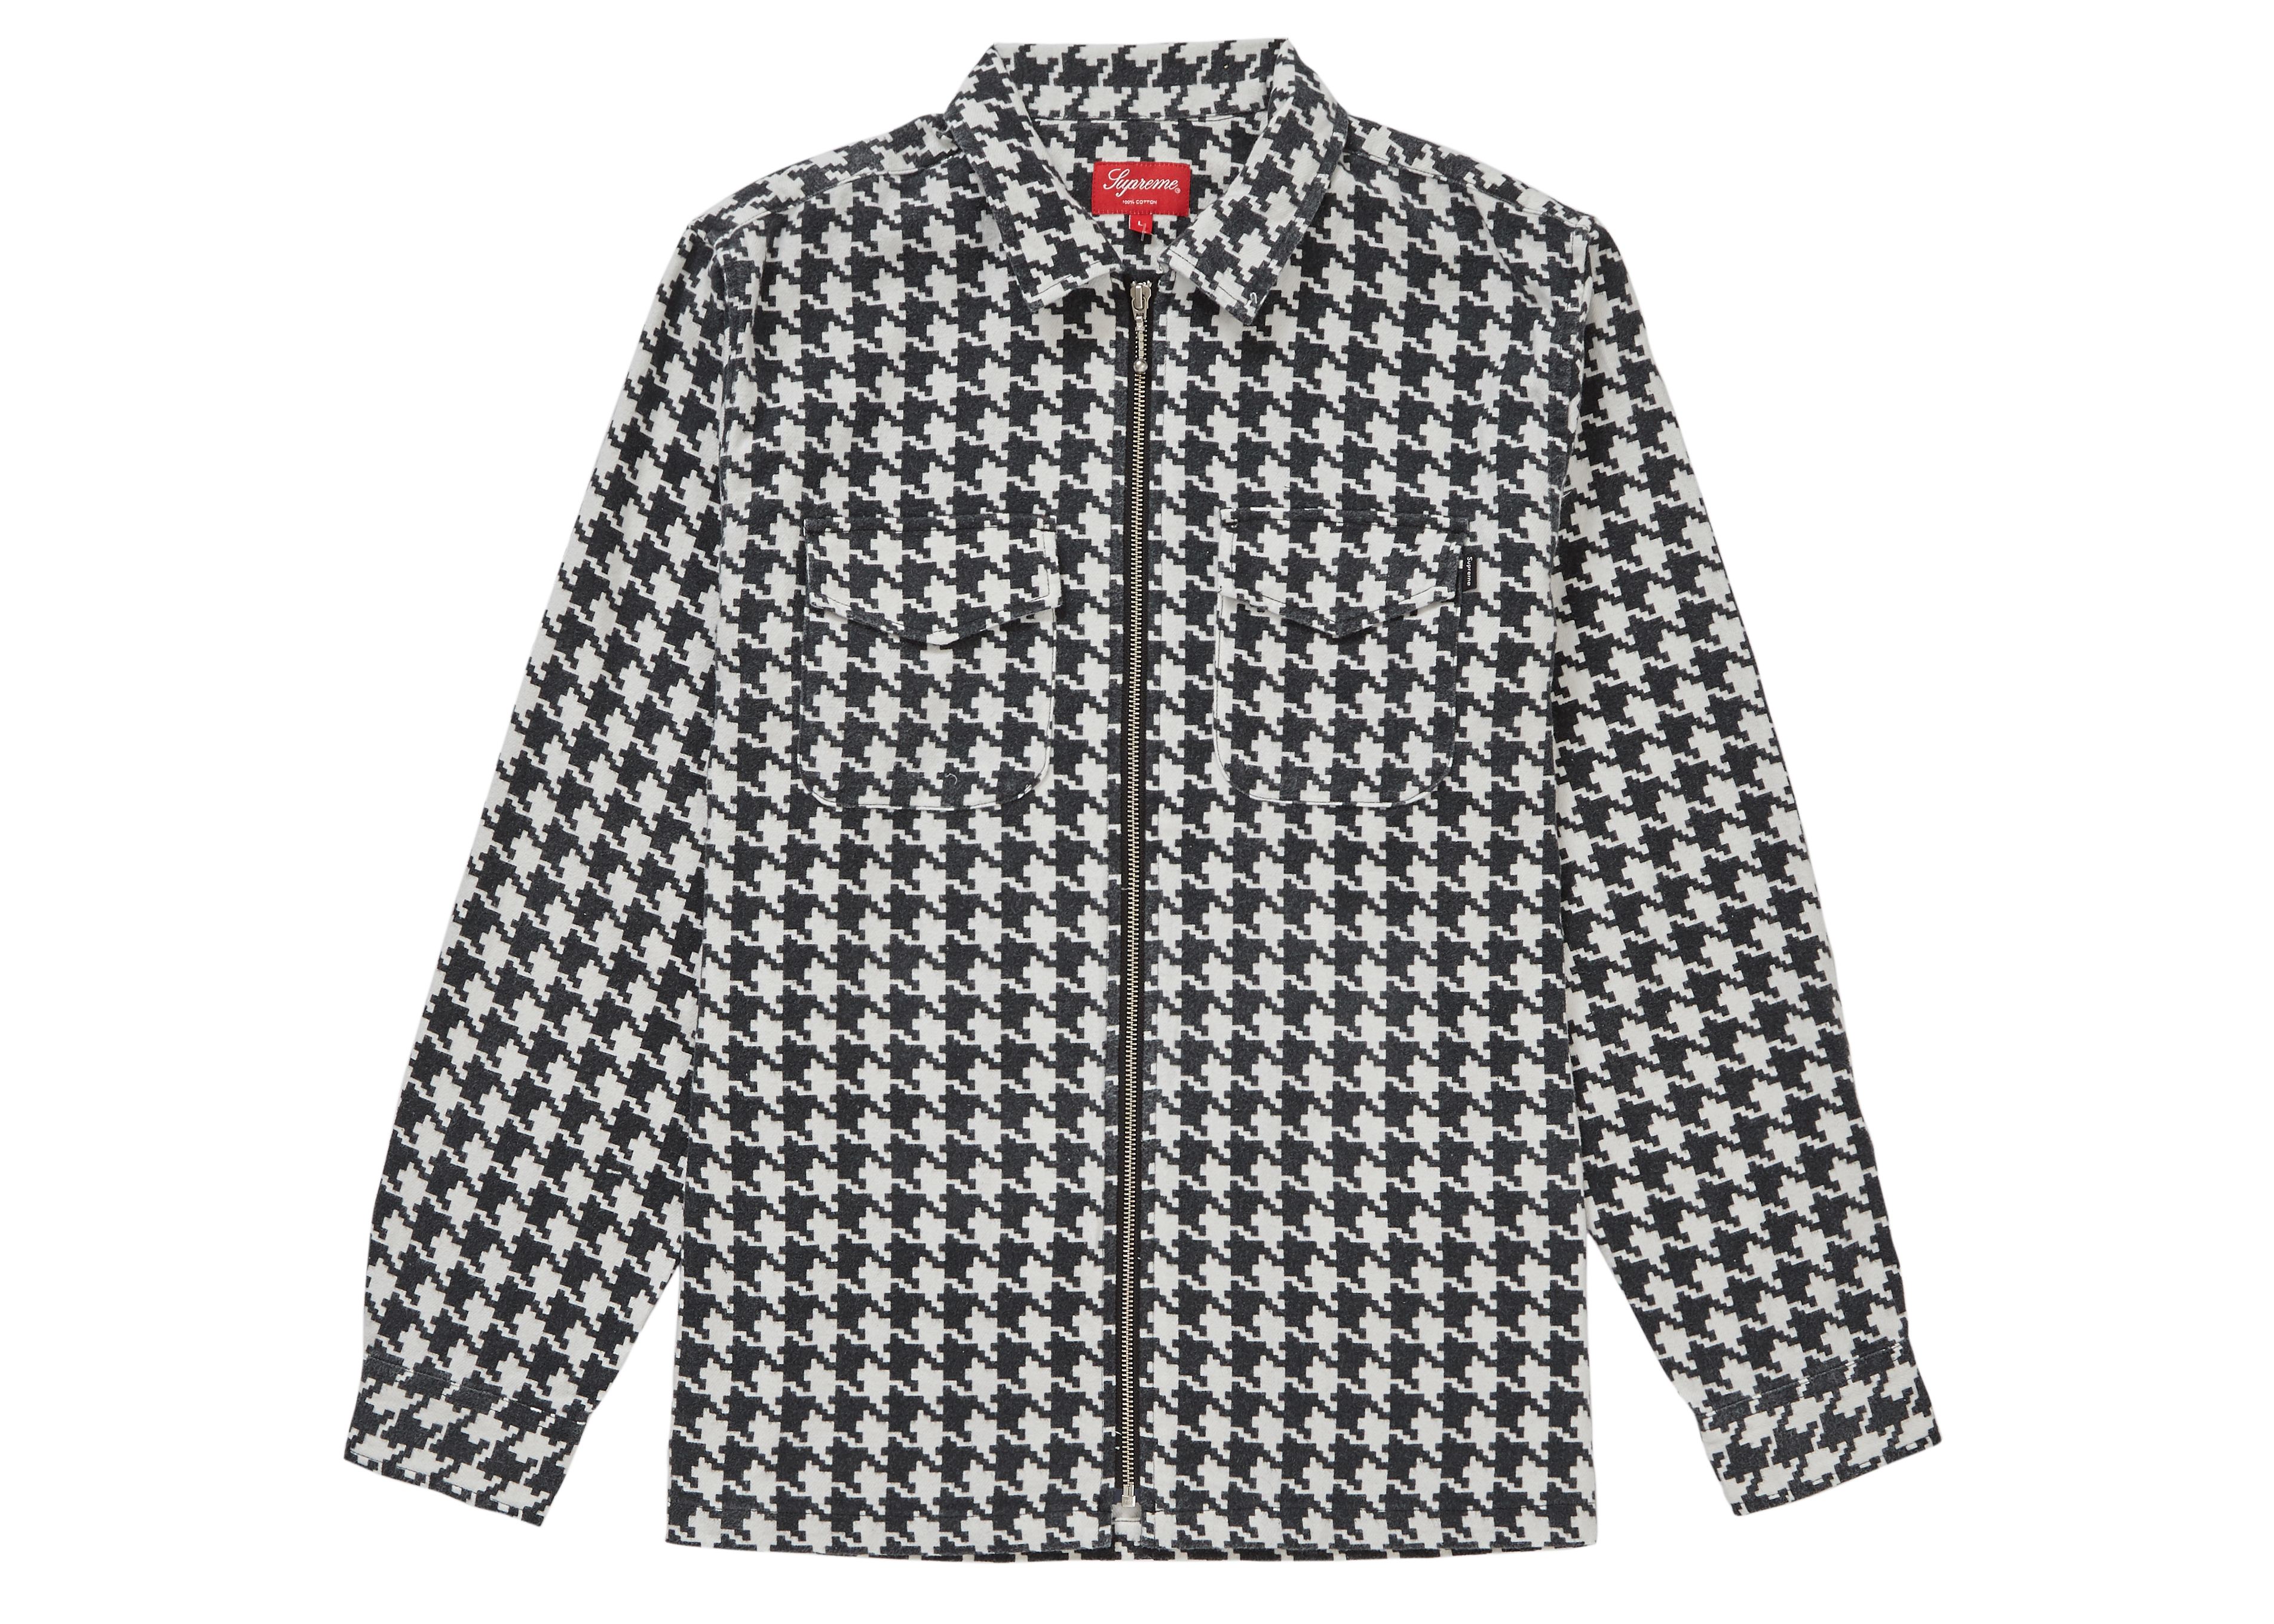 Supreme Houndstooth Flannel Zip Up Shirt White - FW18